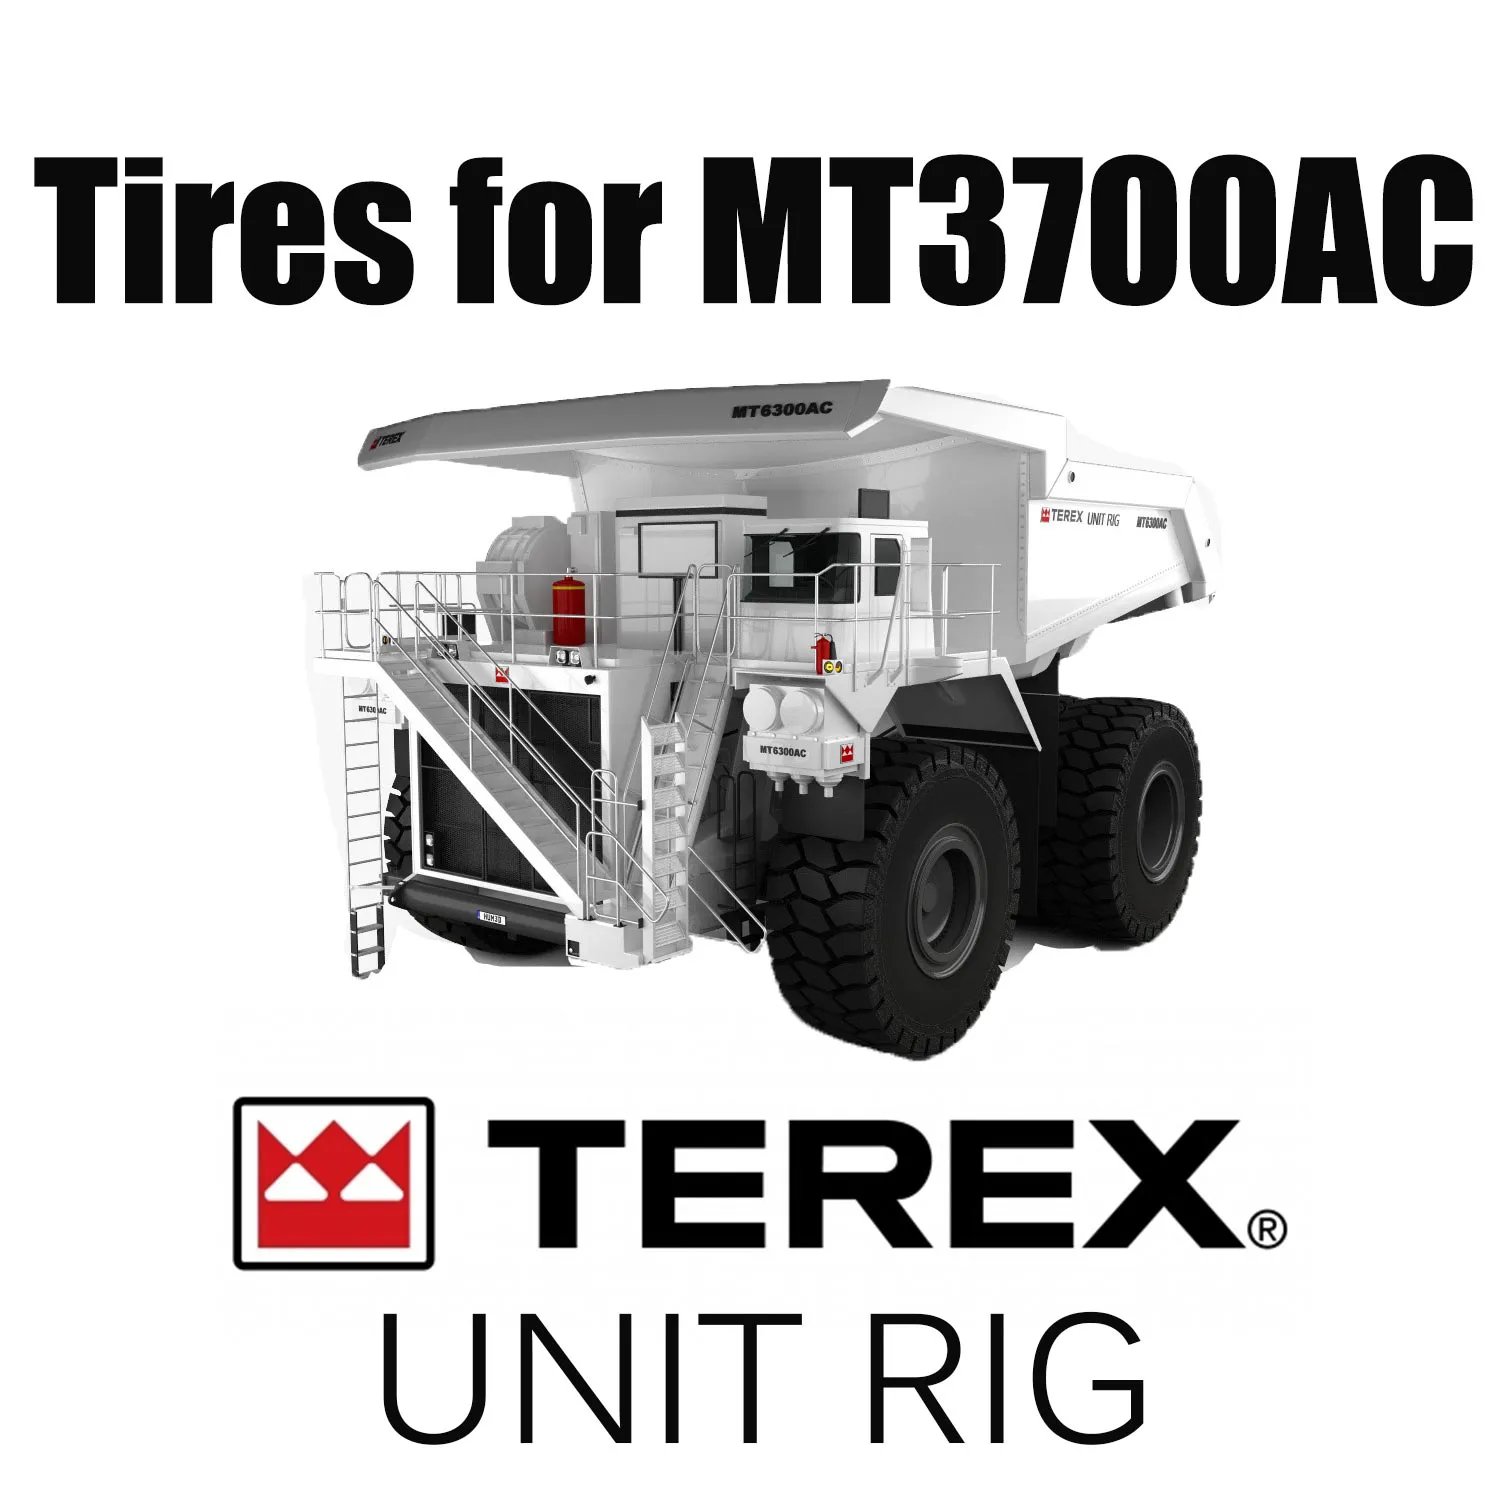 Unit Rig MT3700 AC Haul Truck Equipped with 37.00R57 Mining Tires & Earthmover Tires